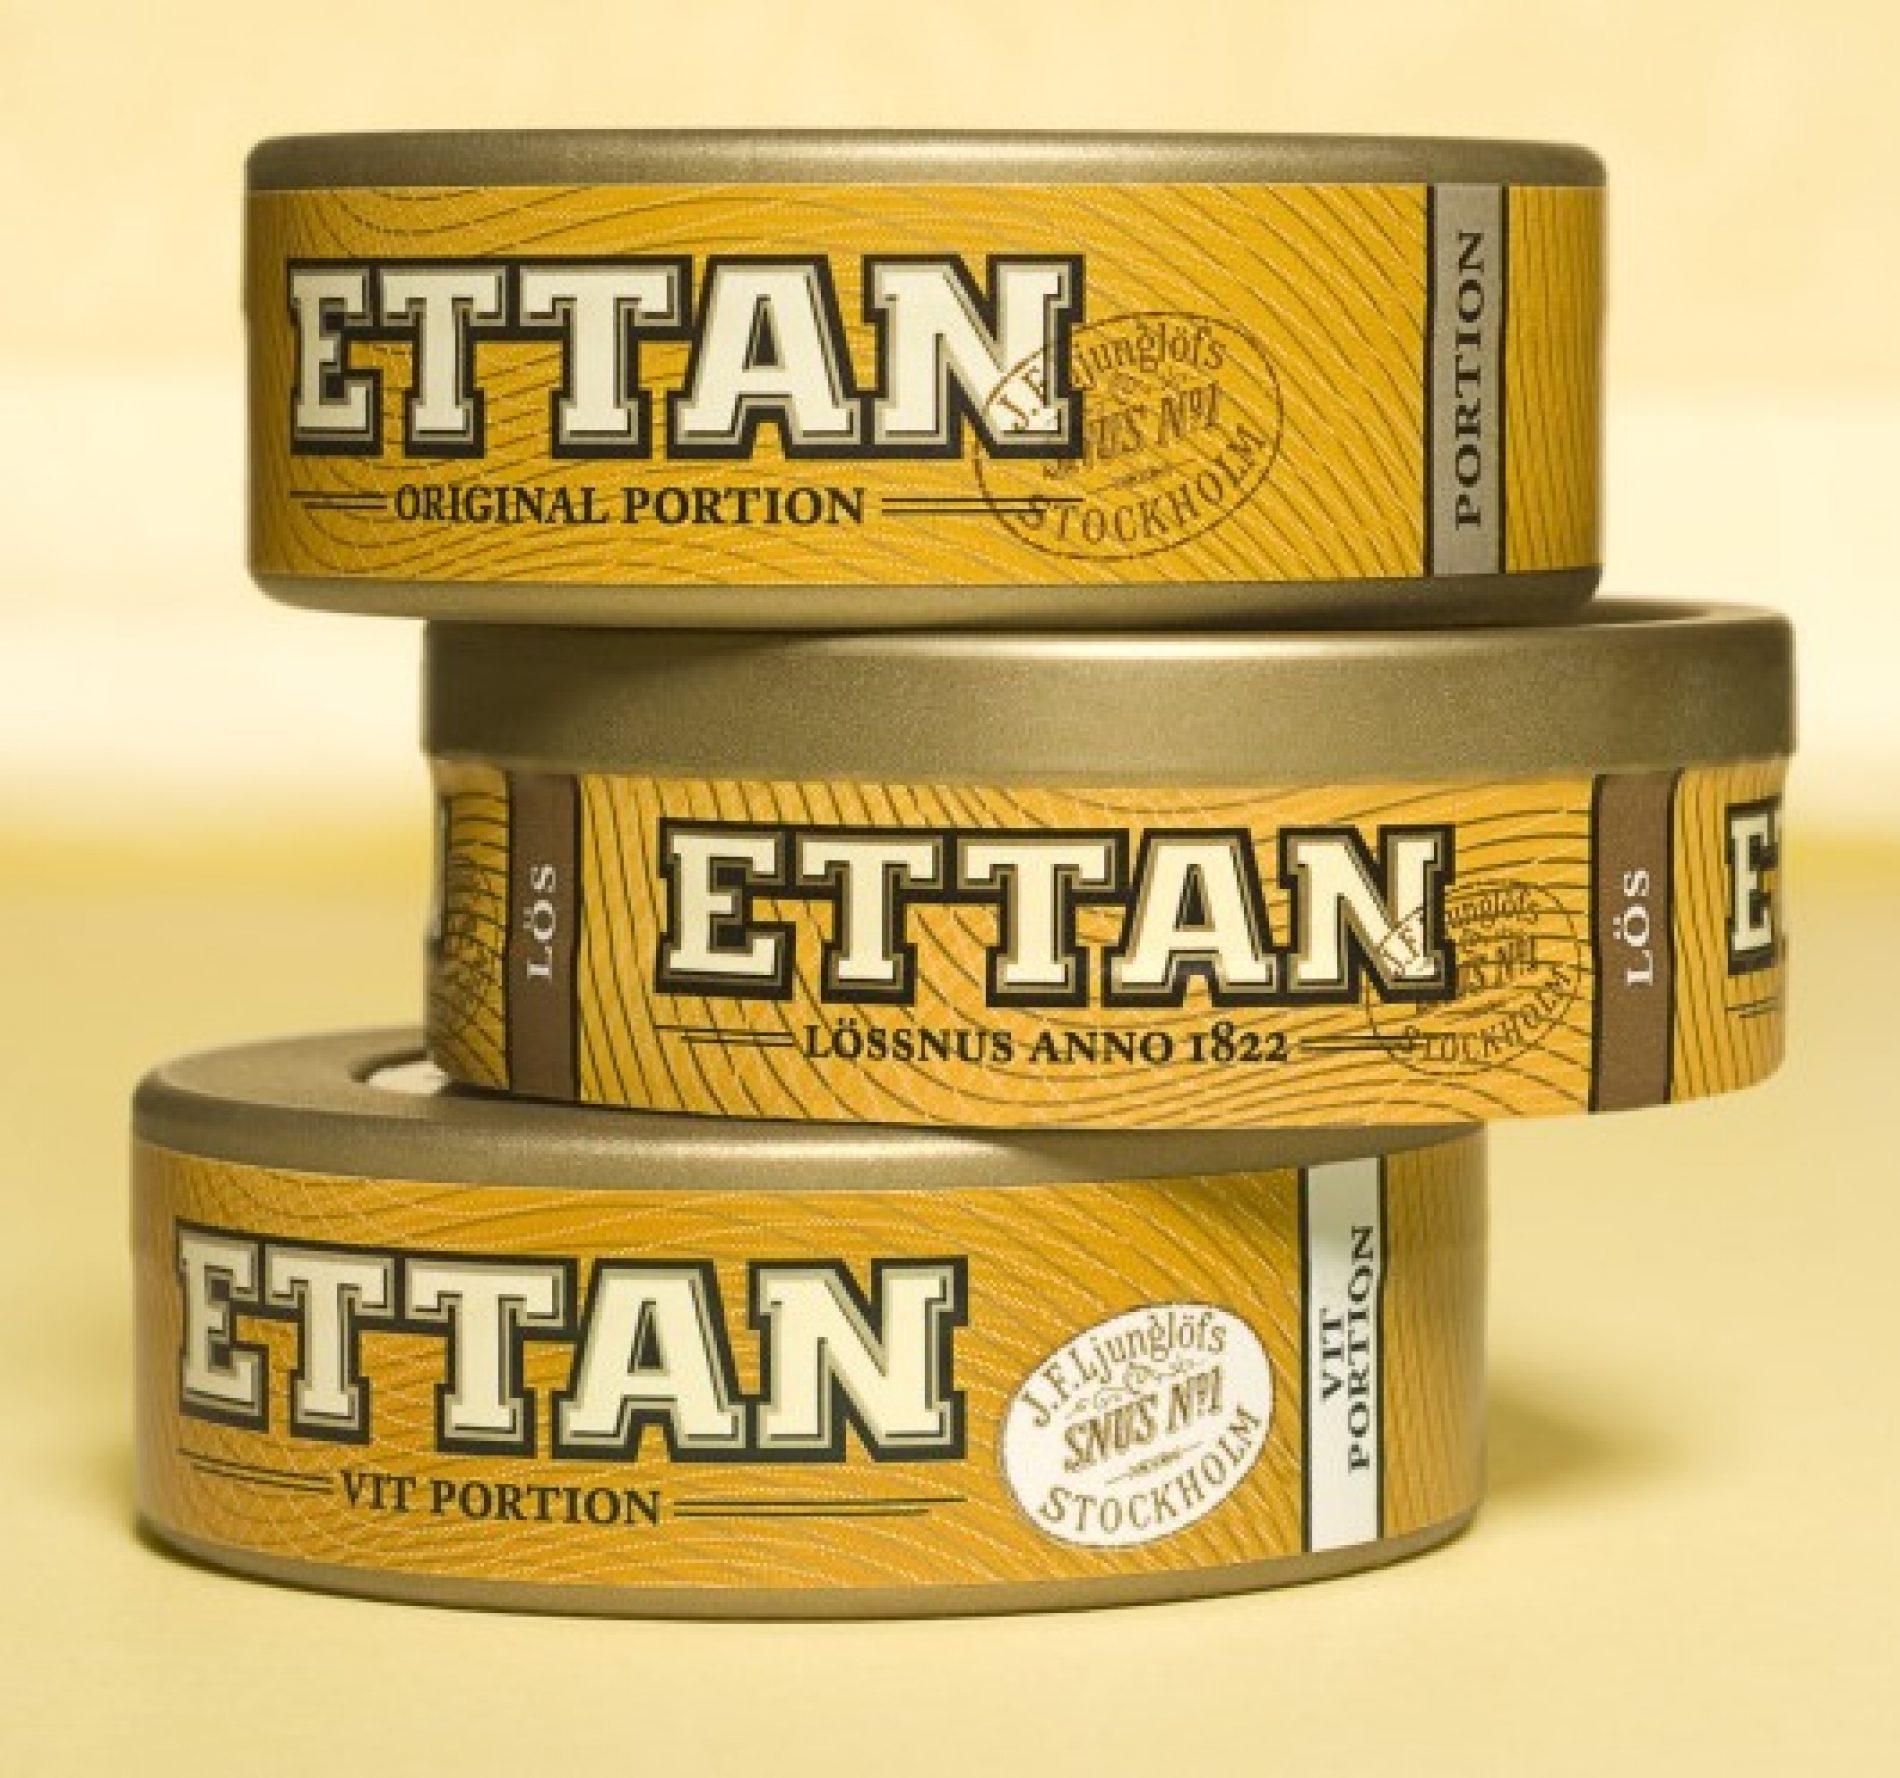 Ettan snus, reviewing an old snus family tradition in Sweden!